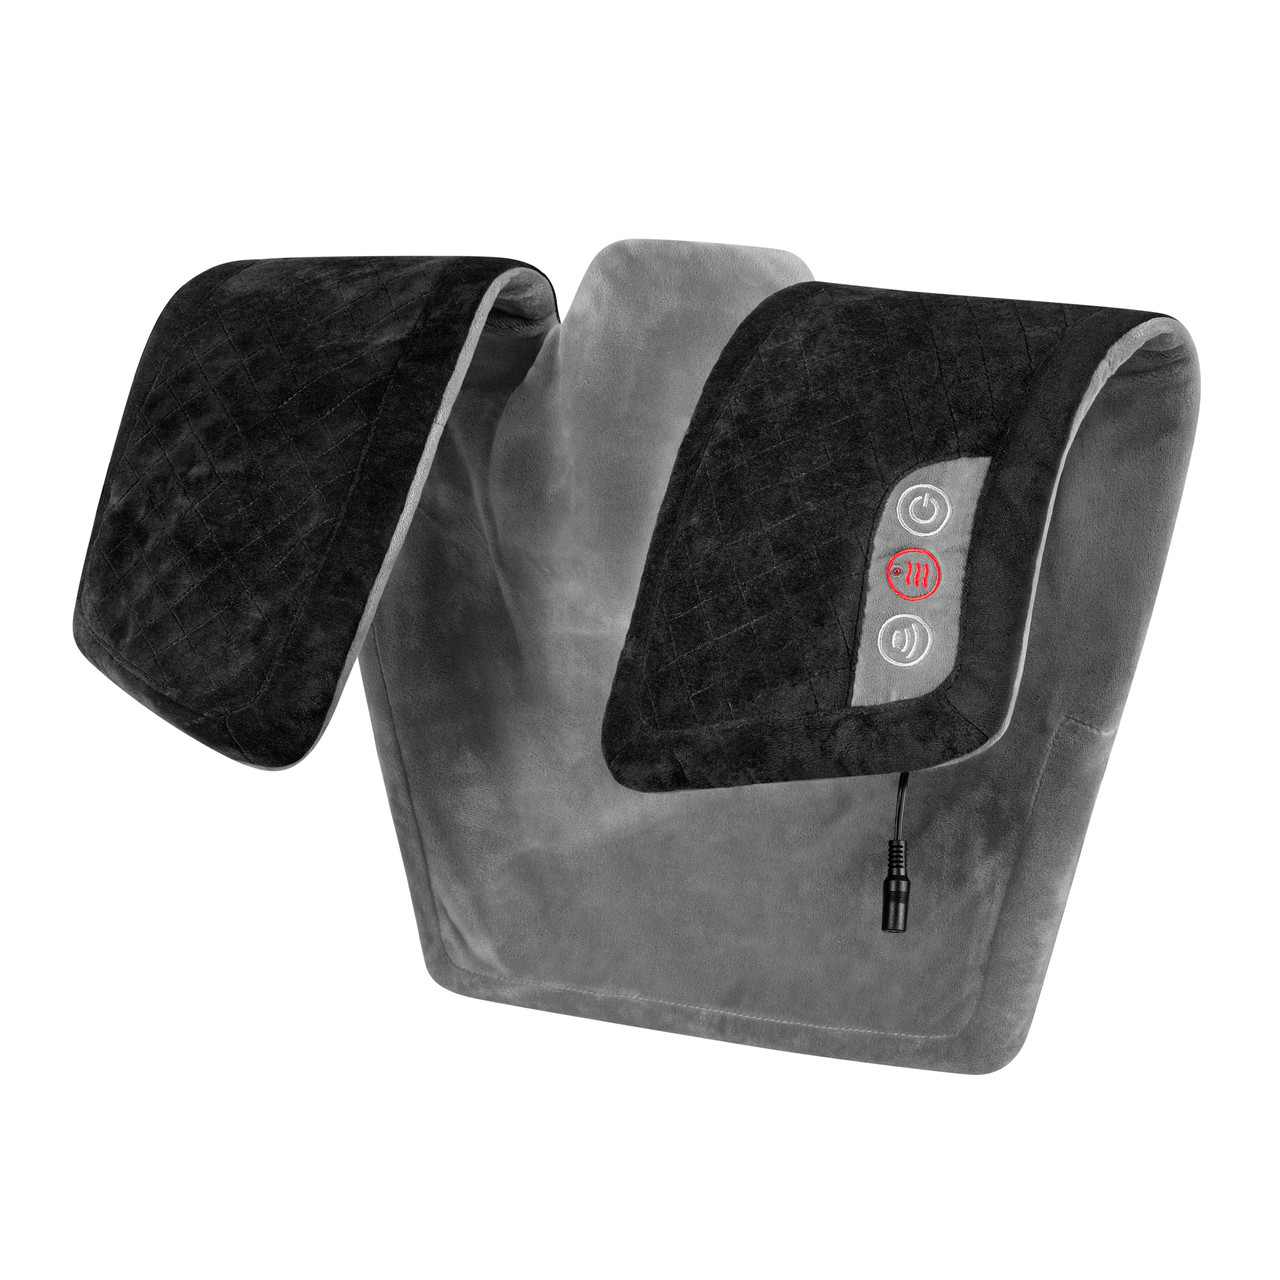  Heating Pad with Massager for Neck and Shoulders